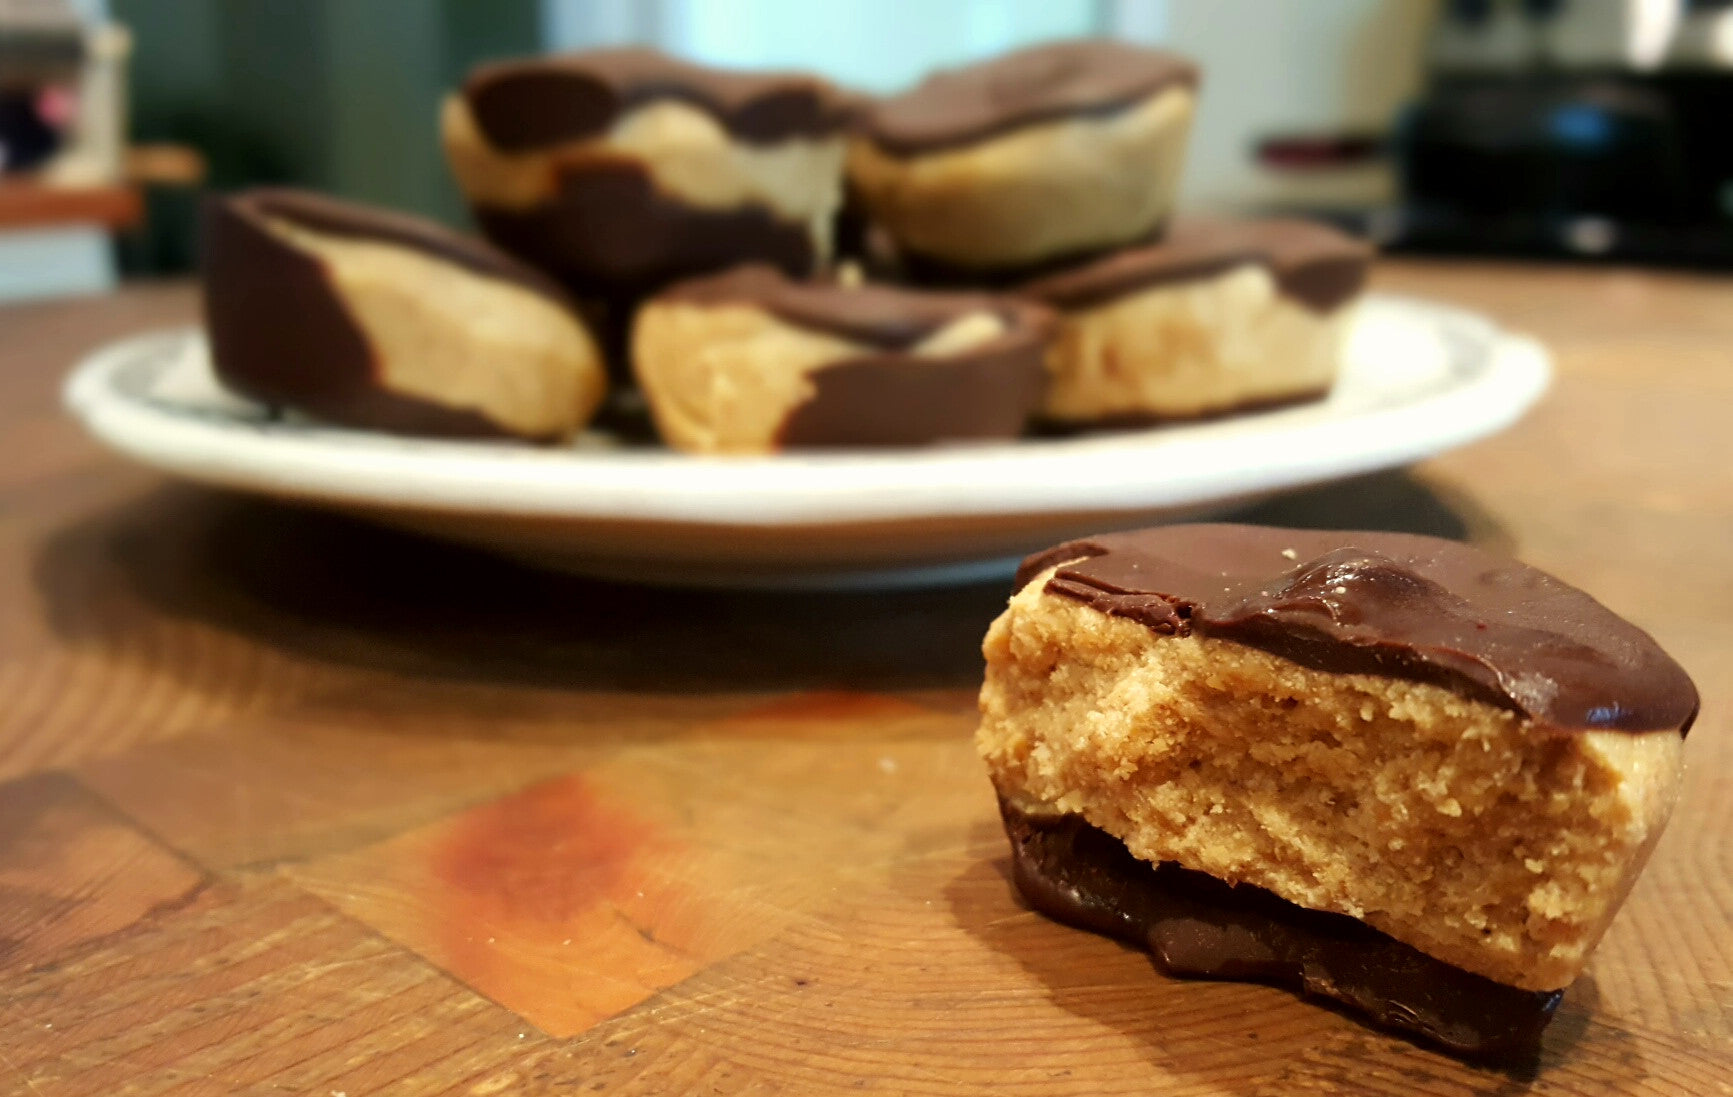 Chocolate Peanut Butter Protein Cups